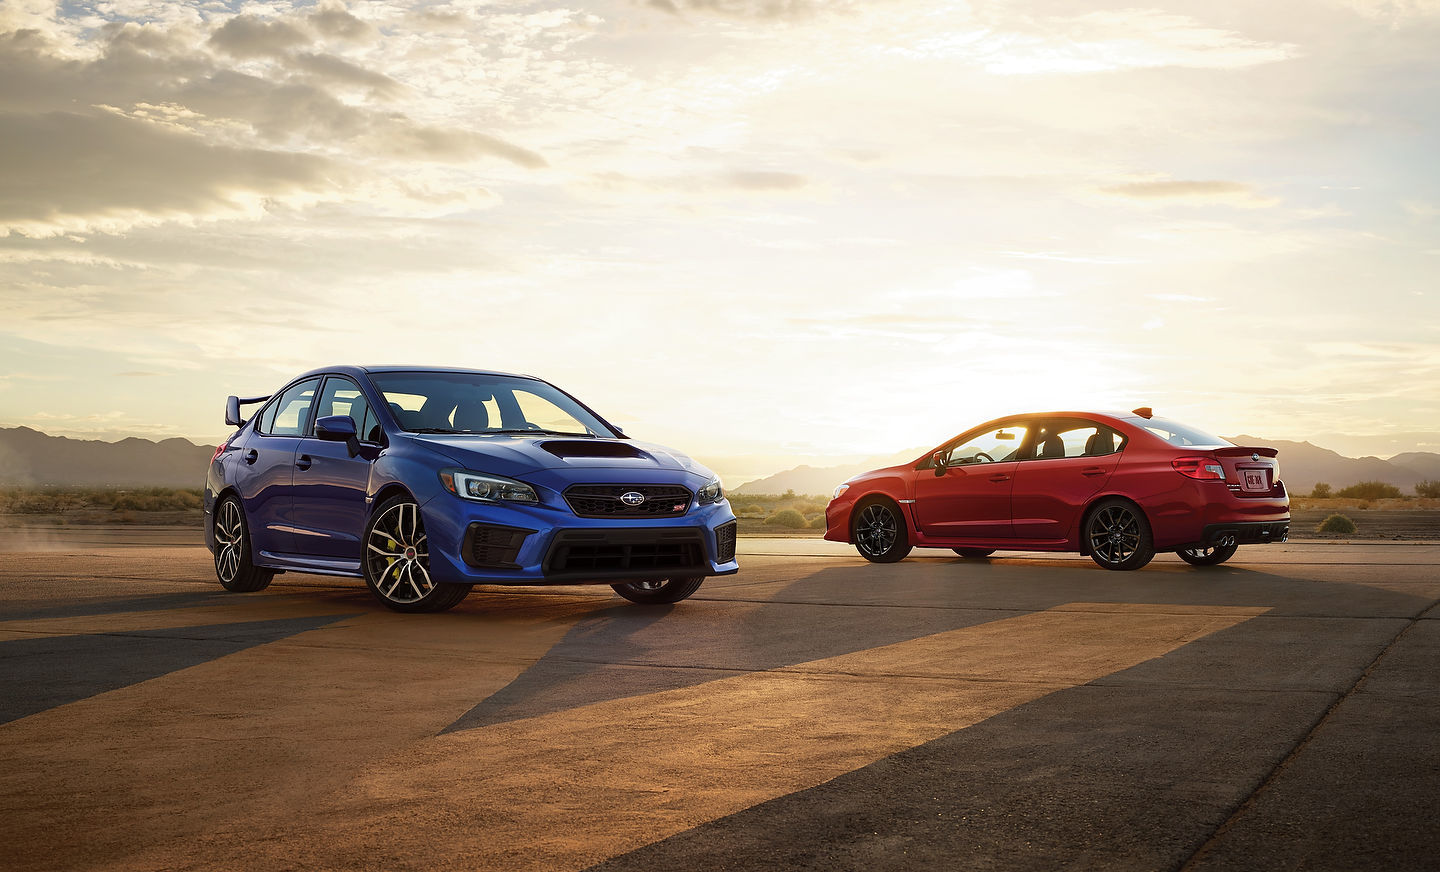 Subaru continues its momentum in November with record sales